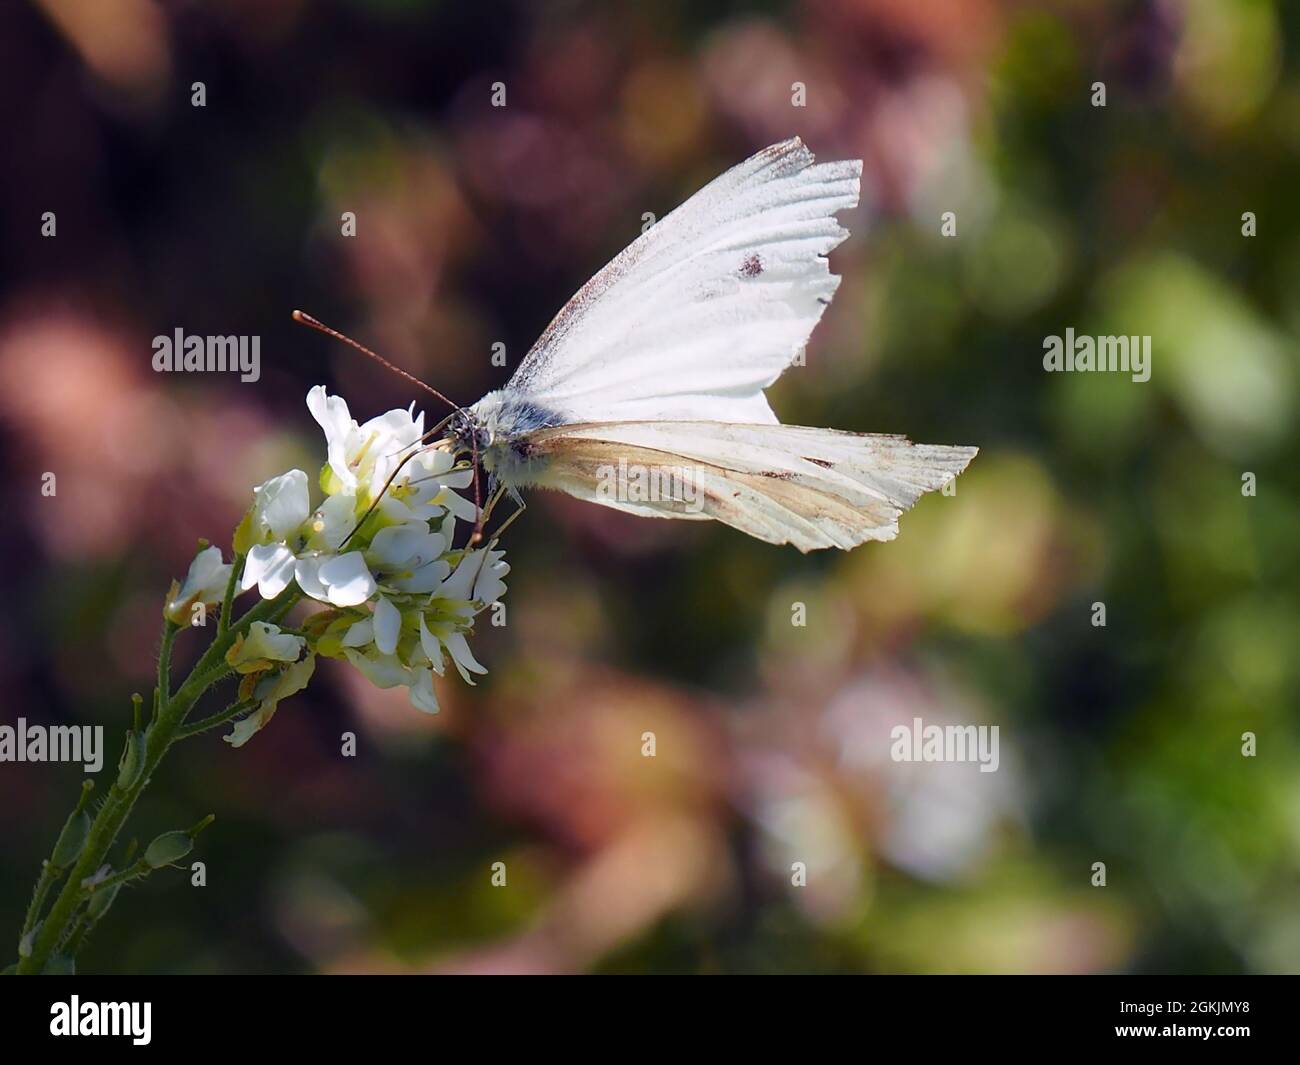 Close-up of a cabbage white butterfly collecting nectar from the white flower on a hoary alyssum plant with a blurred background. Stock Photo